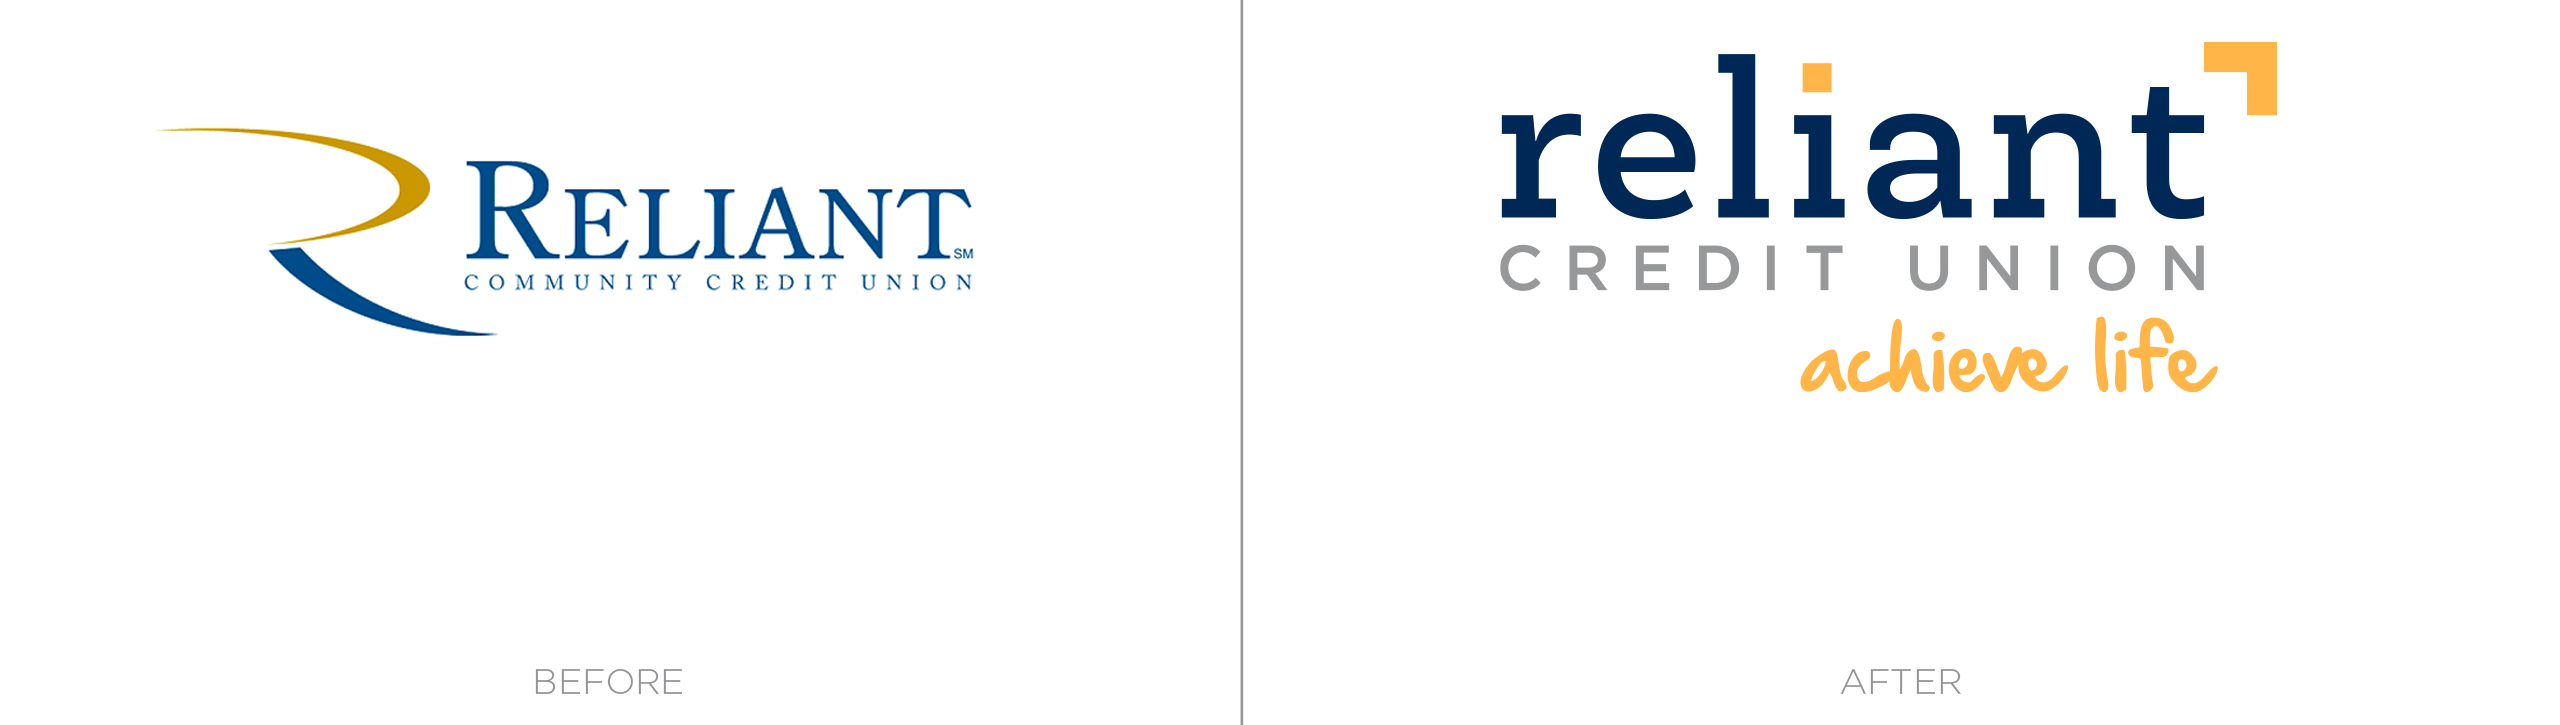 Reliant Credit Union logo before and after